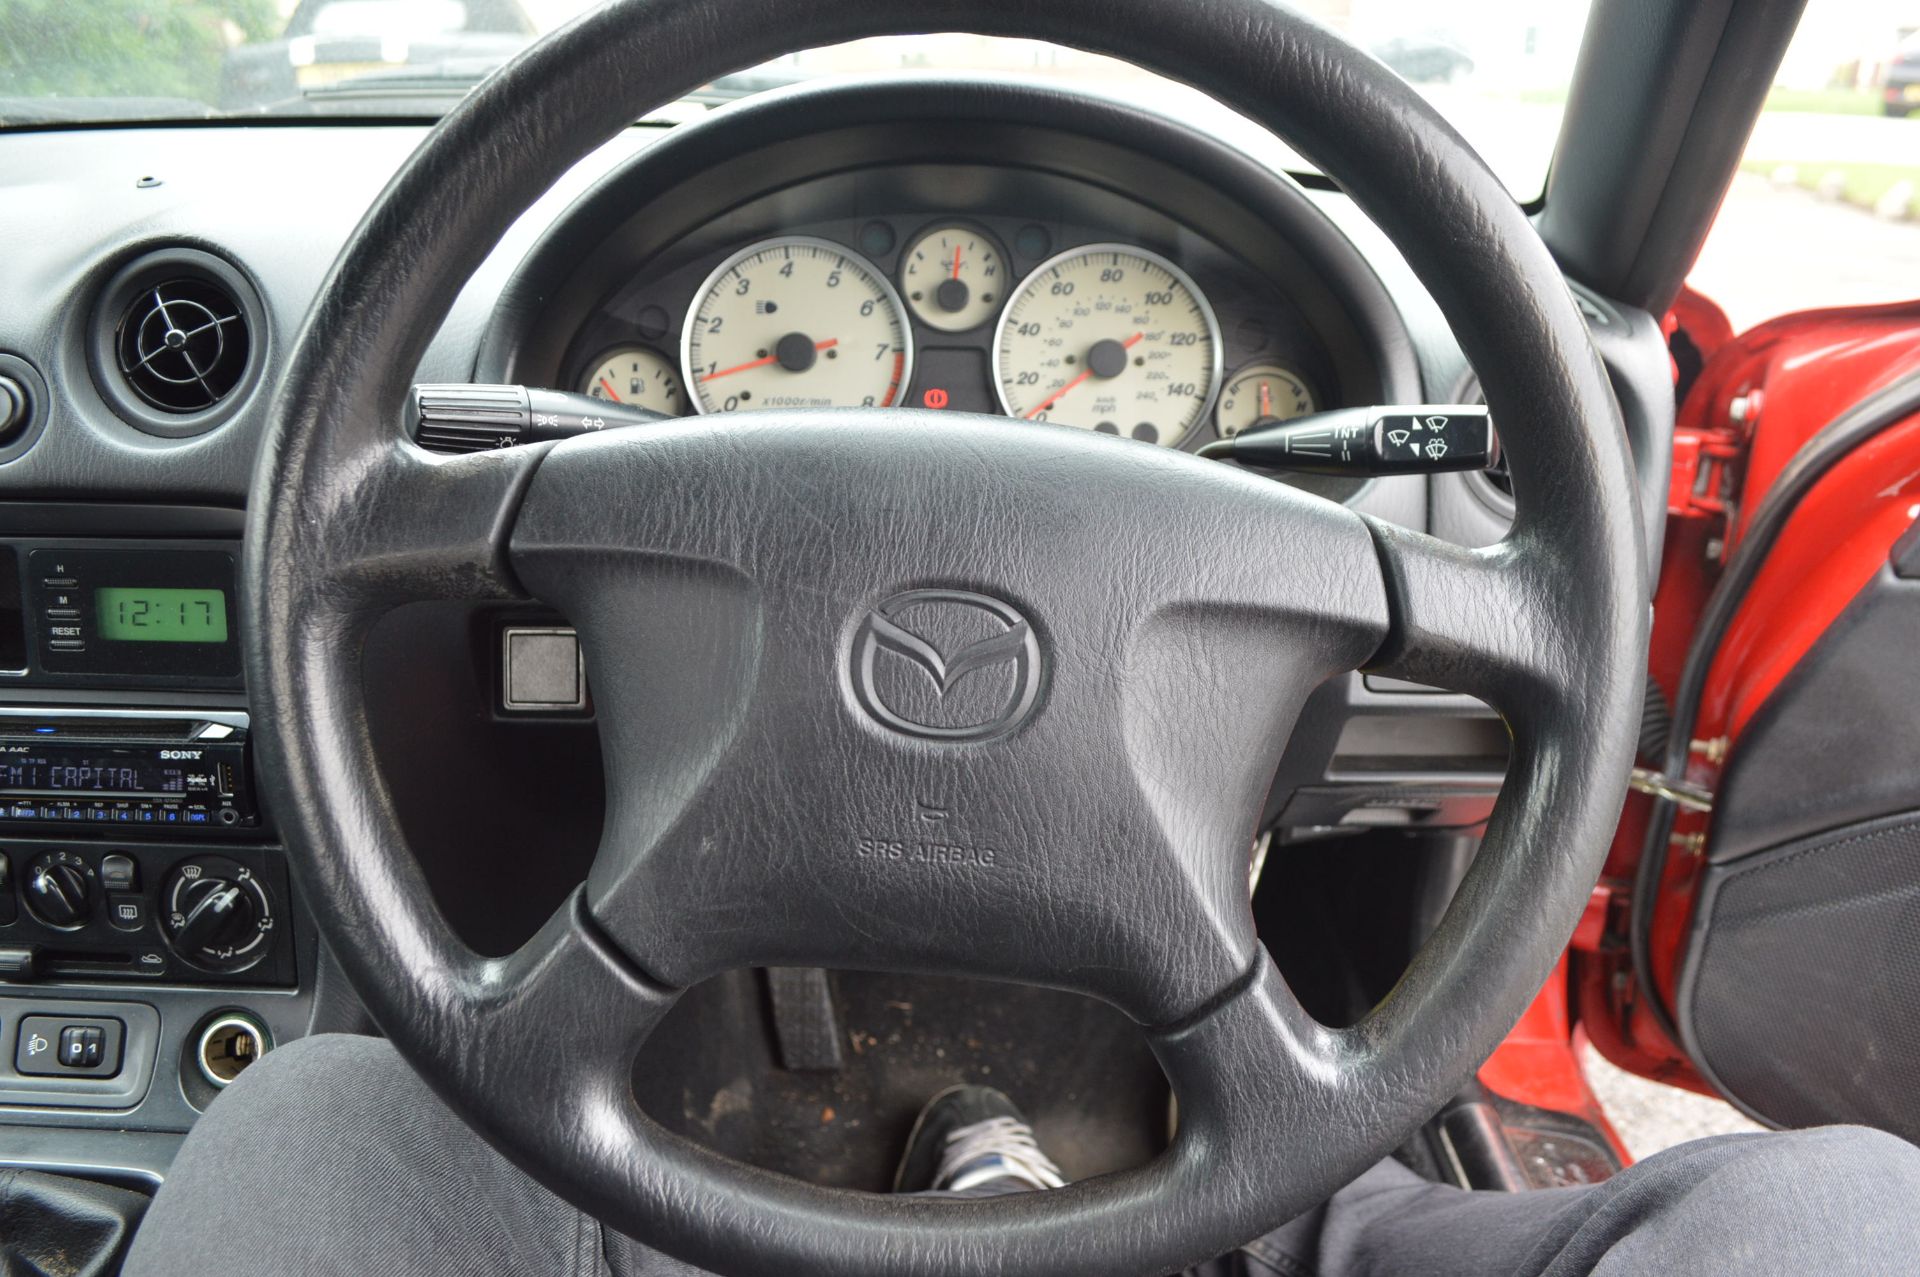 2001/Y REG MAZDA MX-5 1.81 CONVERTIBLE, UPRATED SUSPENSION, BRAKES, INDUCTION ETC - Image 14 of 17